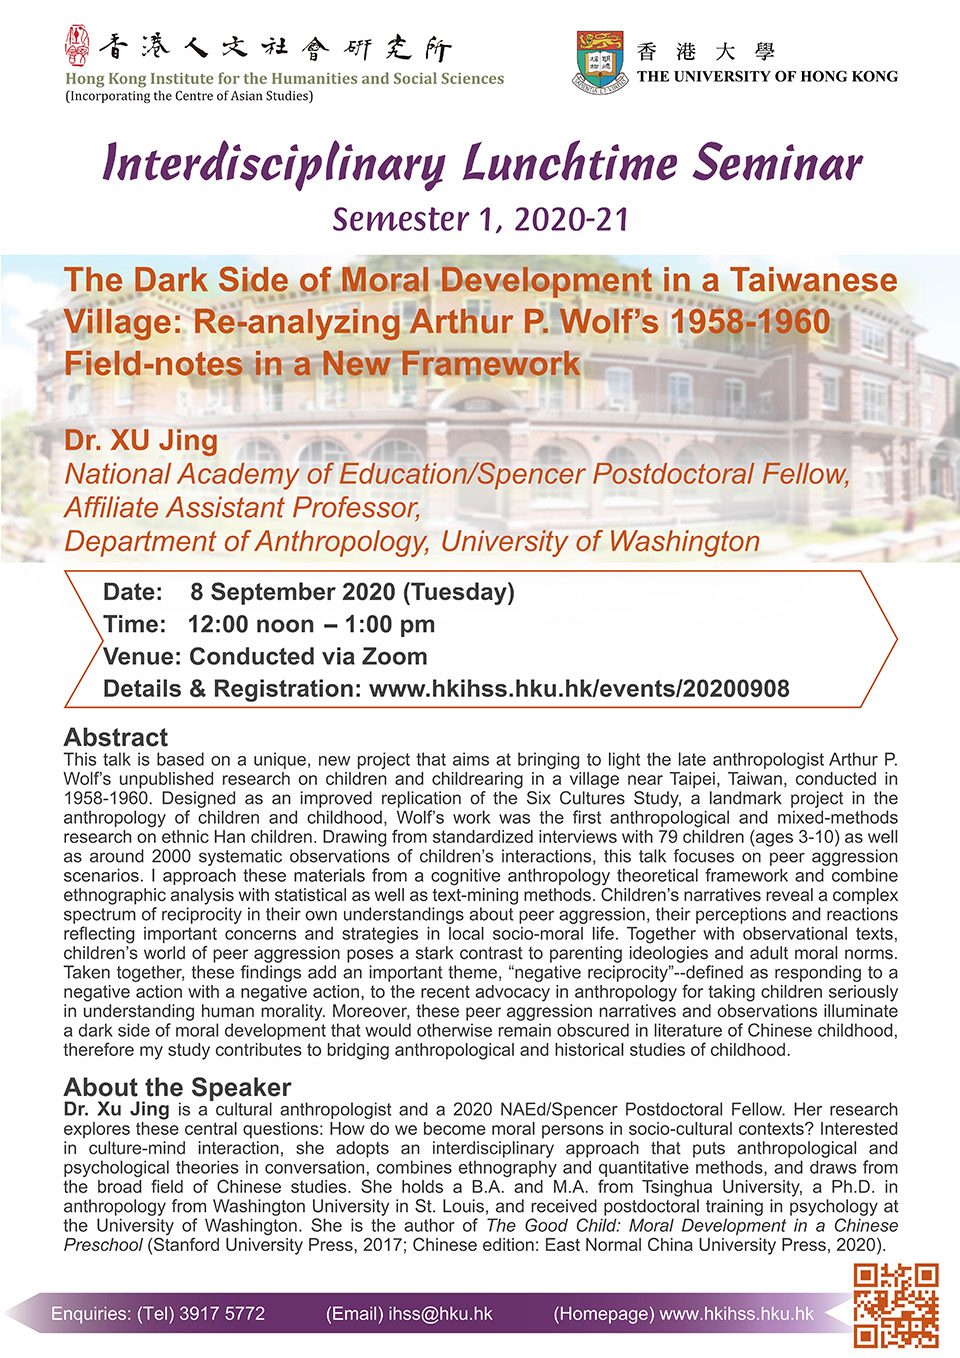 Interdisciplinary Lunchtime Seminar on “The Dark Side of Moral Development in a Taiwanese Village: Re-analyzing Arthur P. Wolf’s 1958-1960 Field-notes in a New Framework” by Dr. Du Jing (September 8, 2020)